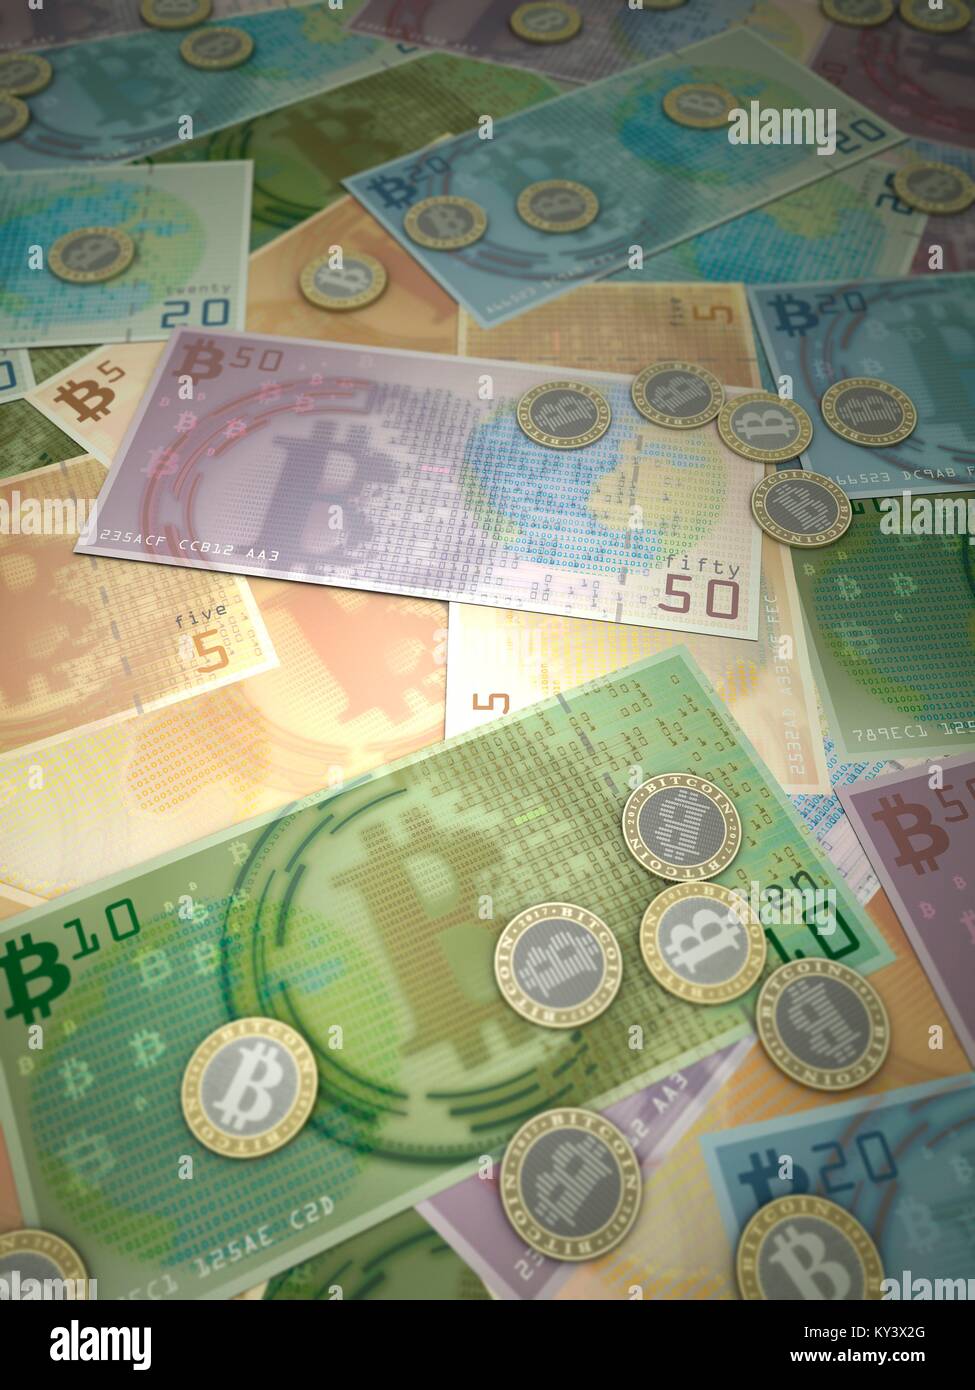 Conceptual illustration representing the bitcoin cryptocurrency as minted coins and printed bills. Bitcoin is a type of digital currency, created in 2009, which operates independently of any bank. Certain vendors now accept Bitcoins as payment of goods or services. Stock Photo